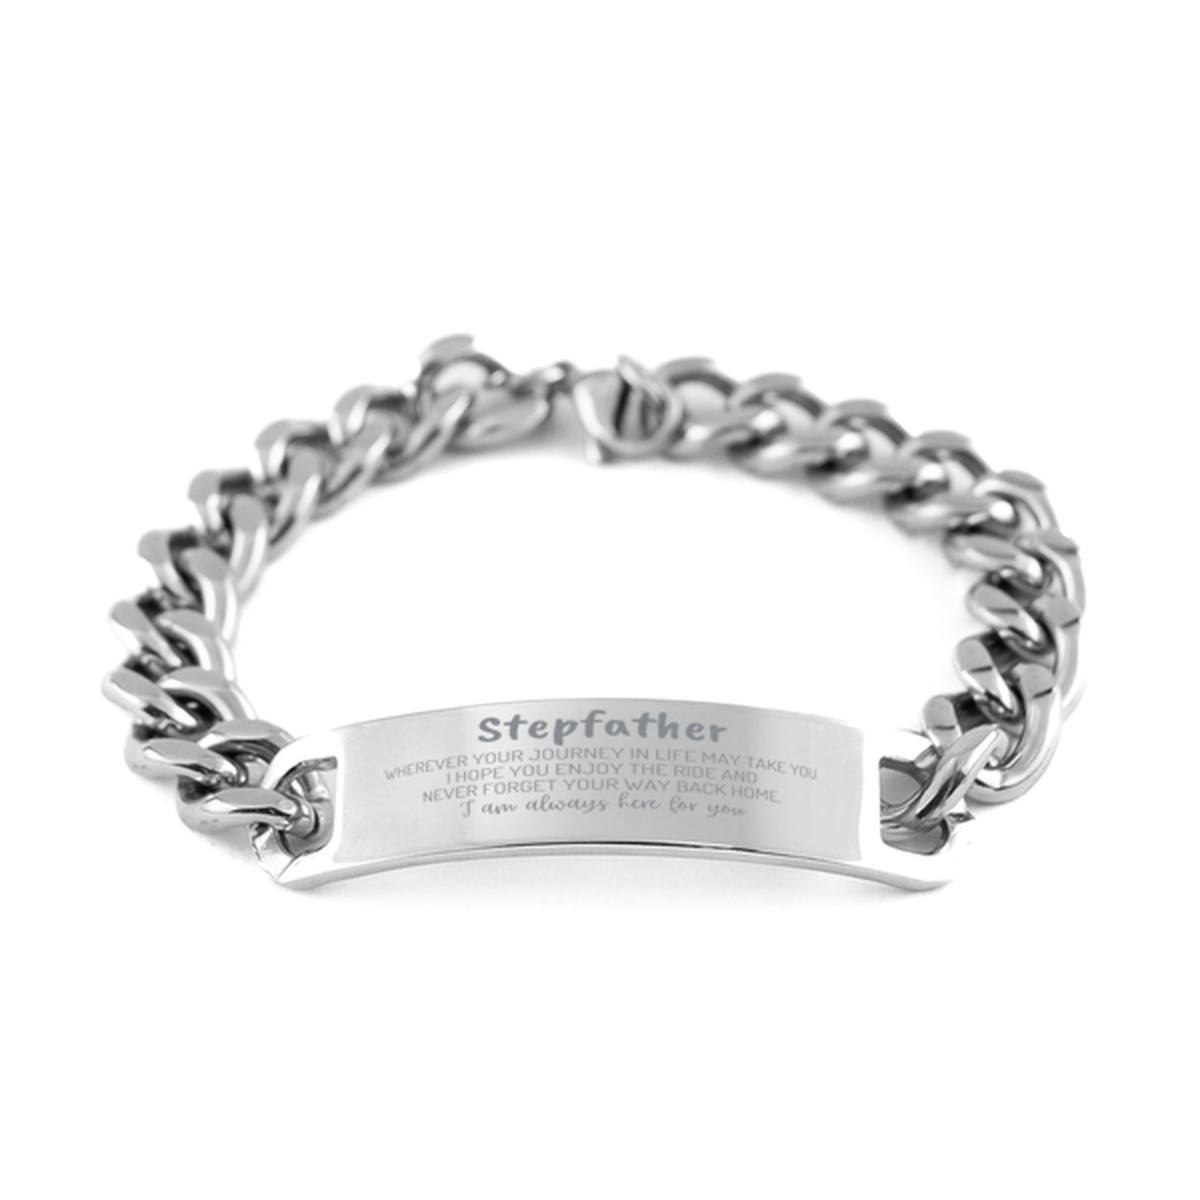 Stepfather wherever your journey in life may take you, I am always here for you Stepfather Cuban Chain Stainless Steel Bracelet, Awesome Christmas Gifts For Stepfather, Stepfather Birthday Gifts for Men Women Family Loved One